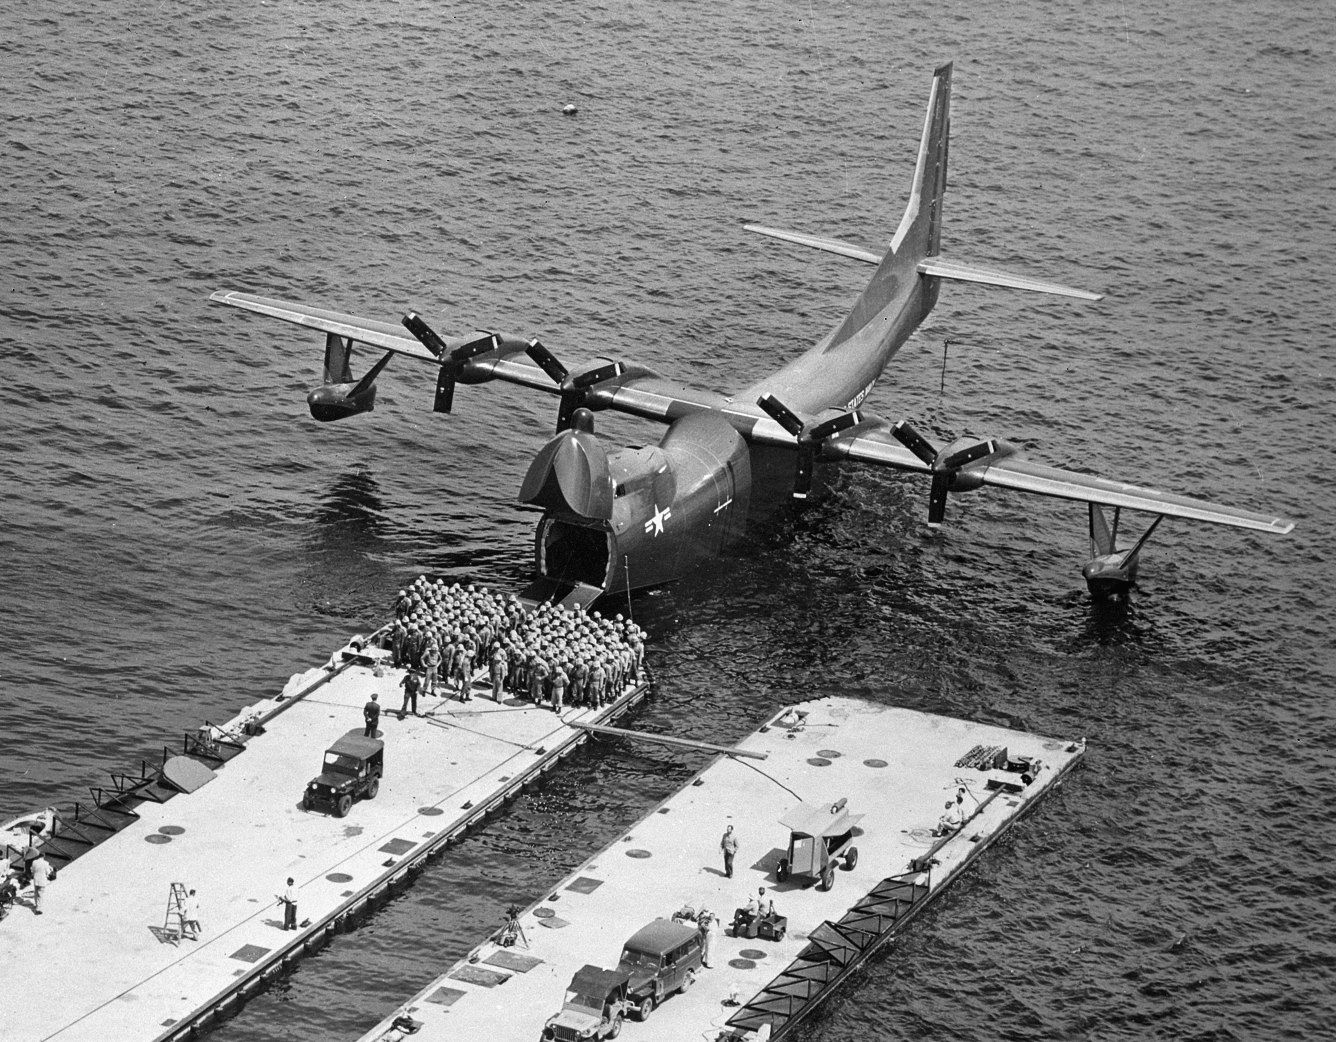 The Convair R3Y-1 Tradewind, nicknamed the Flying LST, was intended to operate as a landing craft, but it performed more efficiently as an aerial tanker.